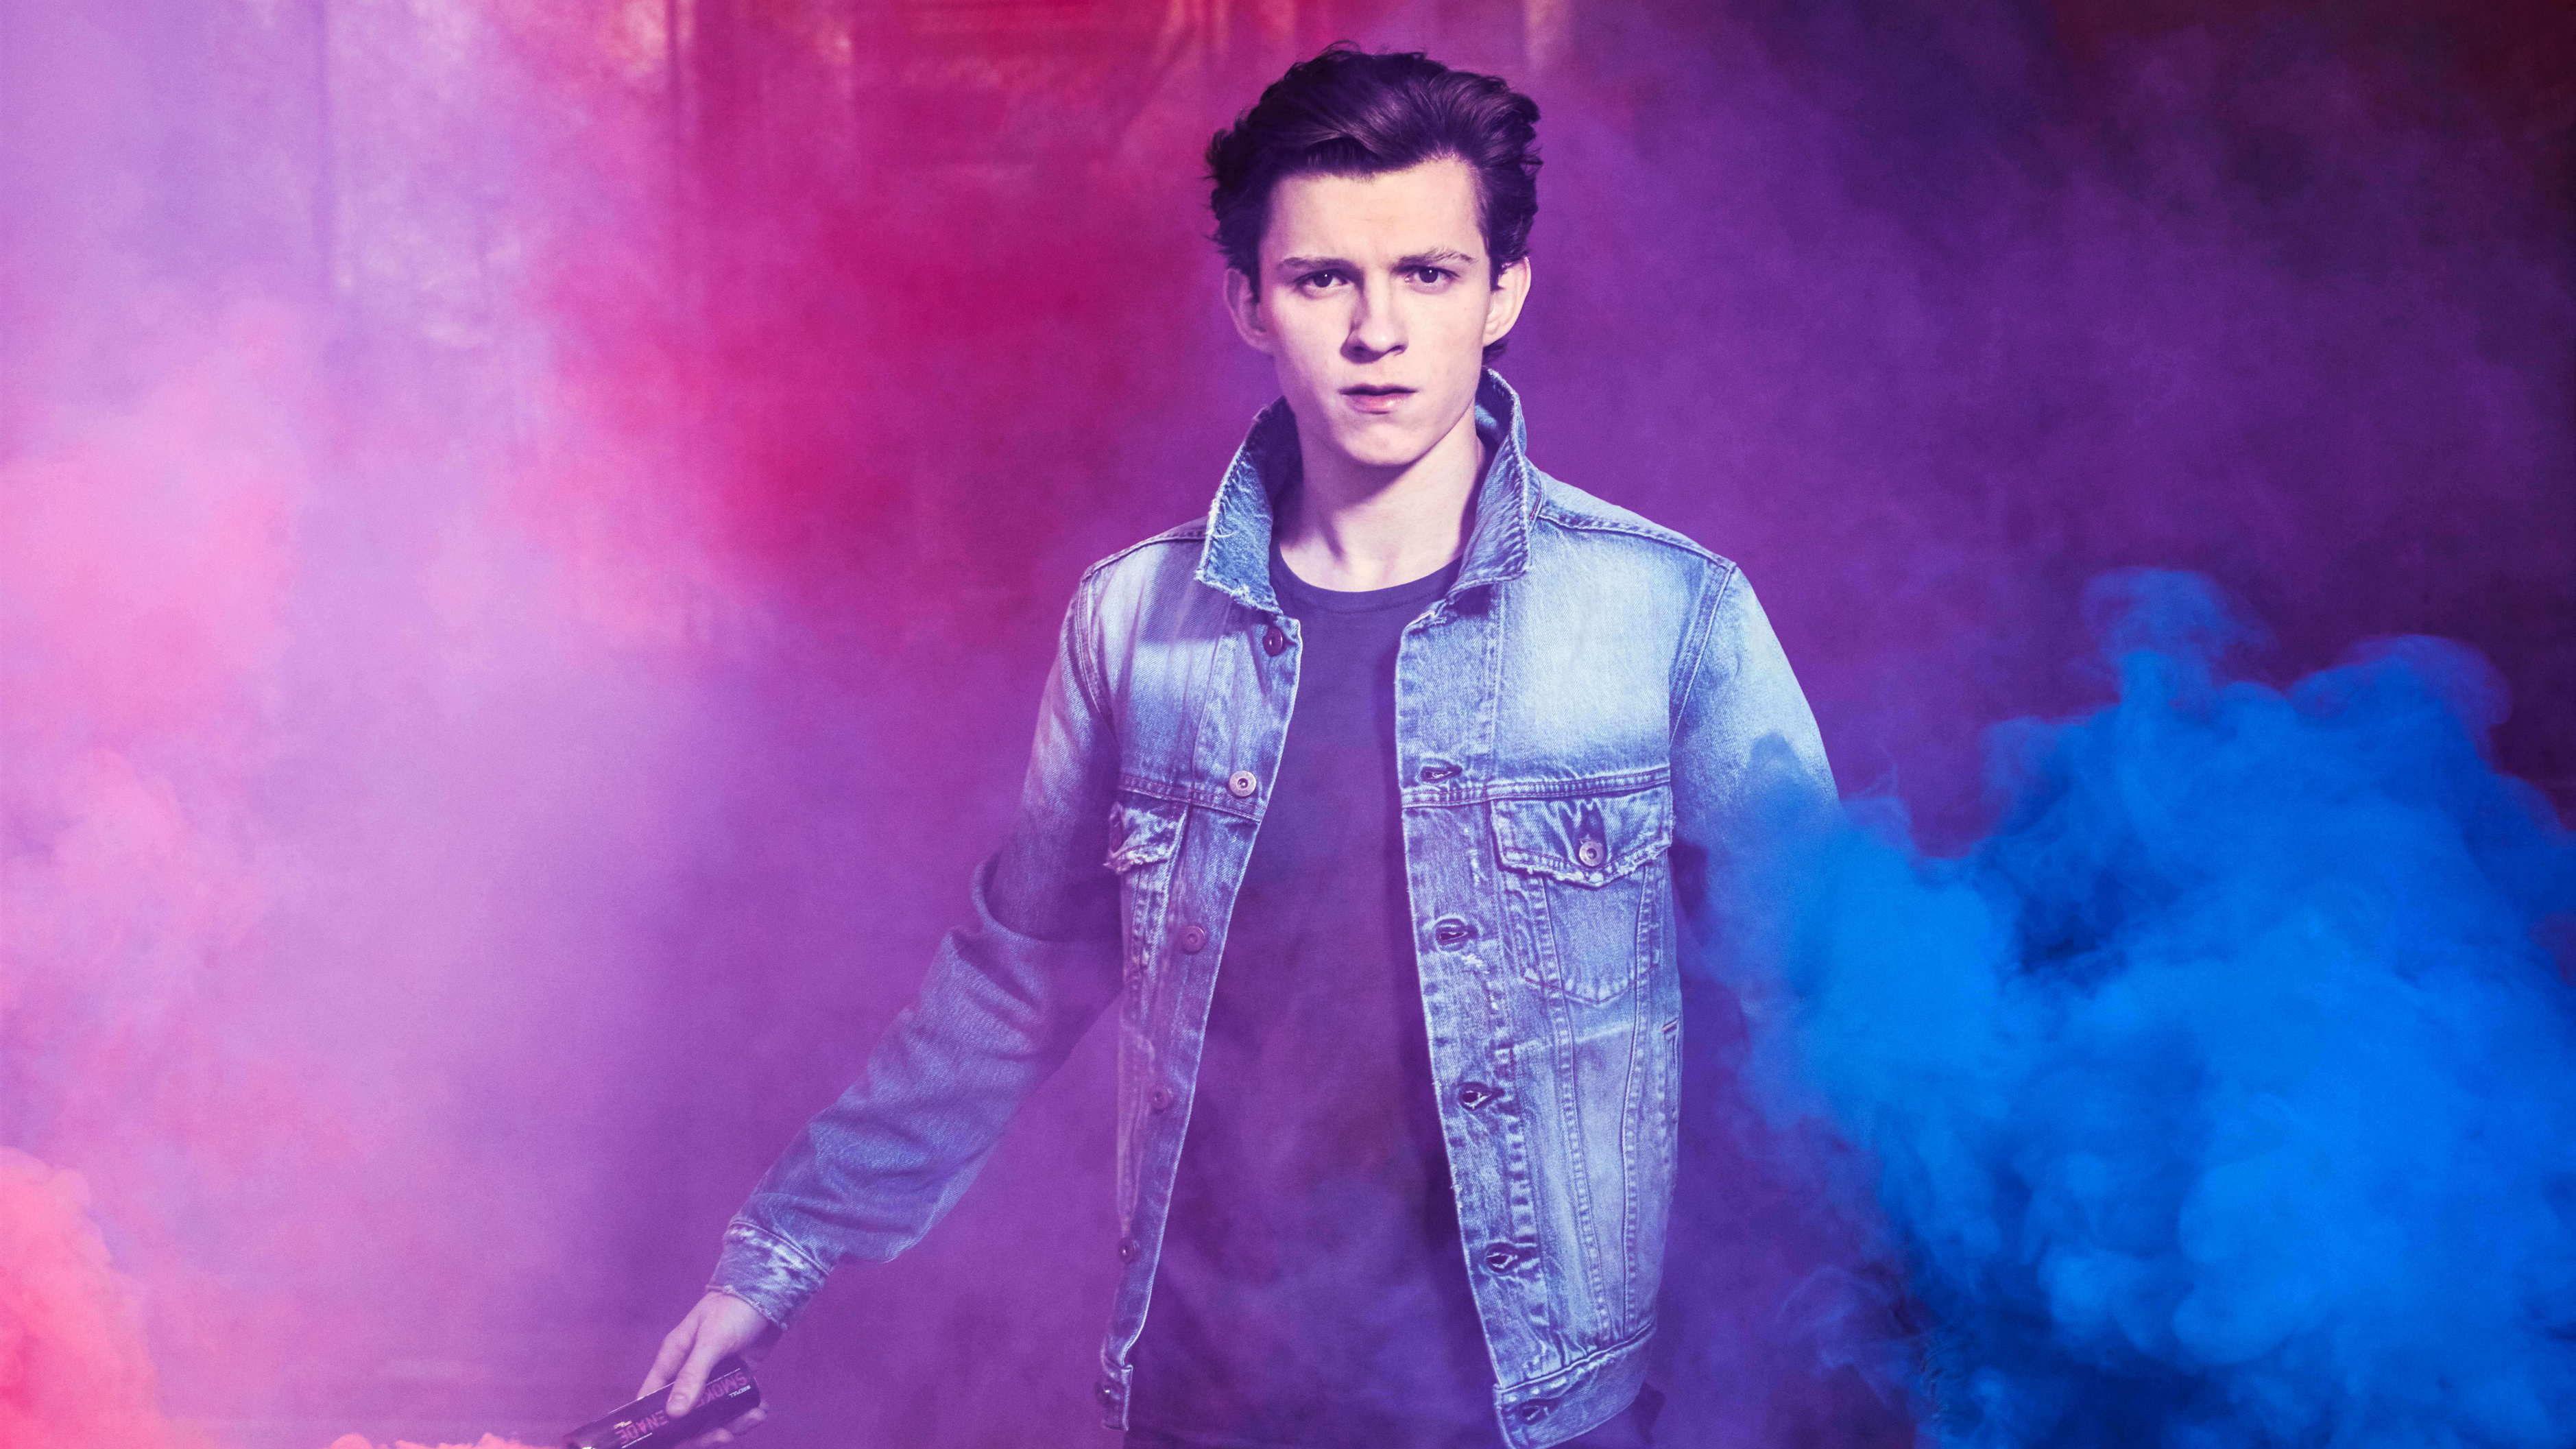 Tom Holland Laptop Wallpapers Top Free Tom Holland Laptop Backgrounds Wallpaperaccess